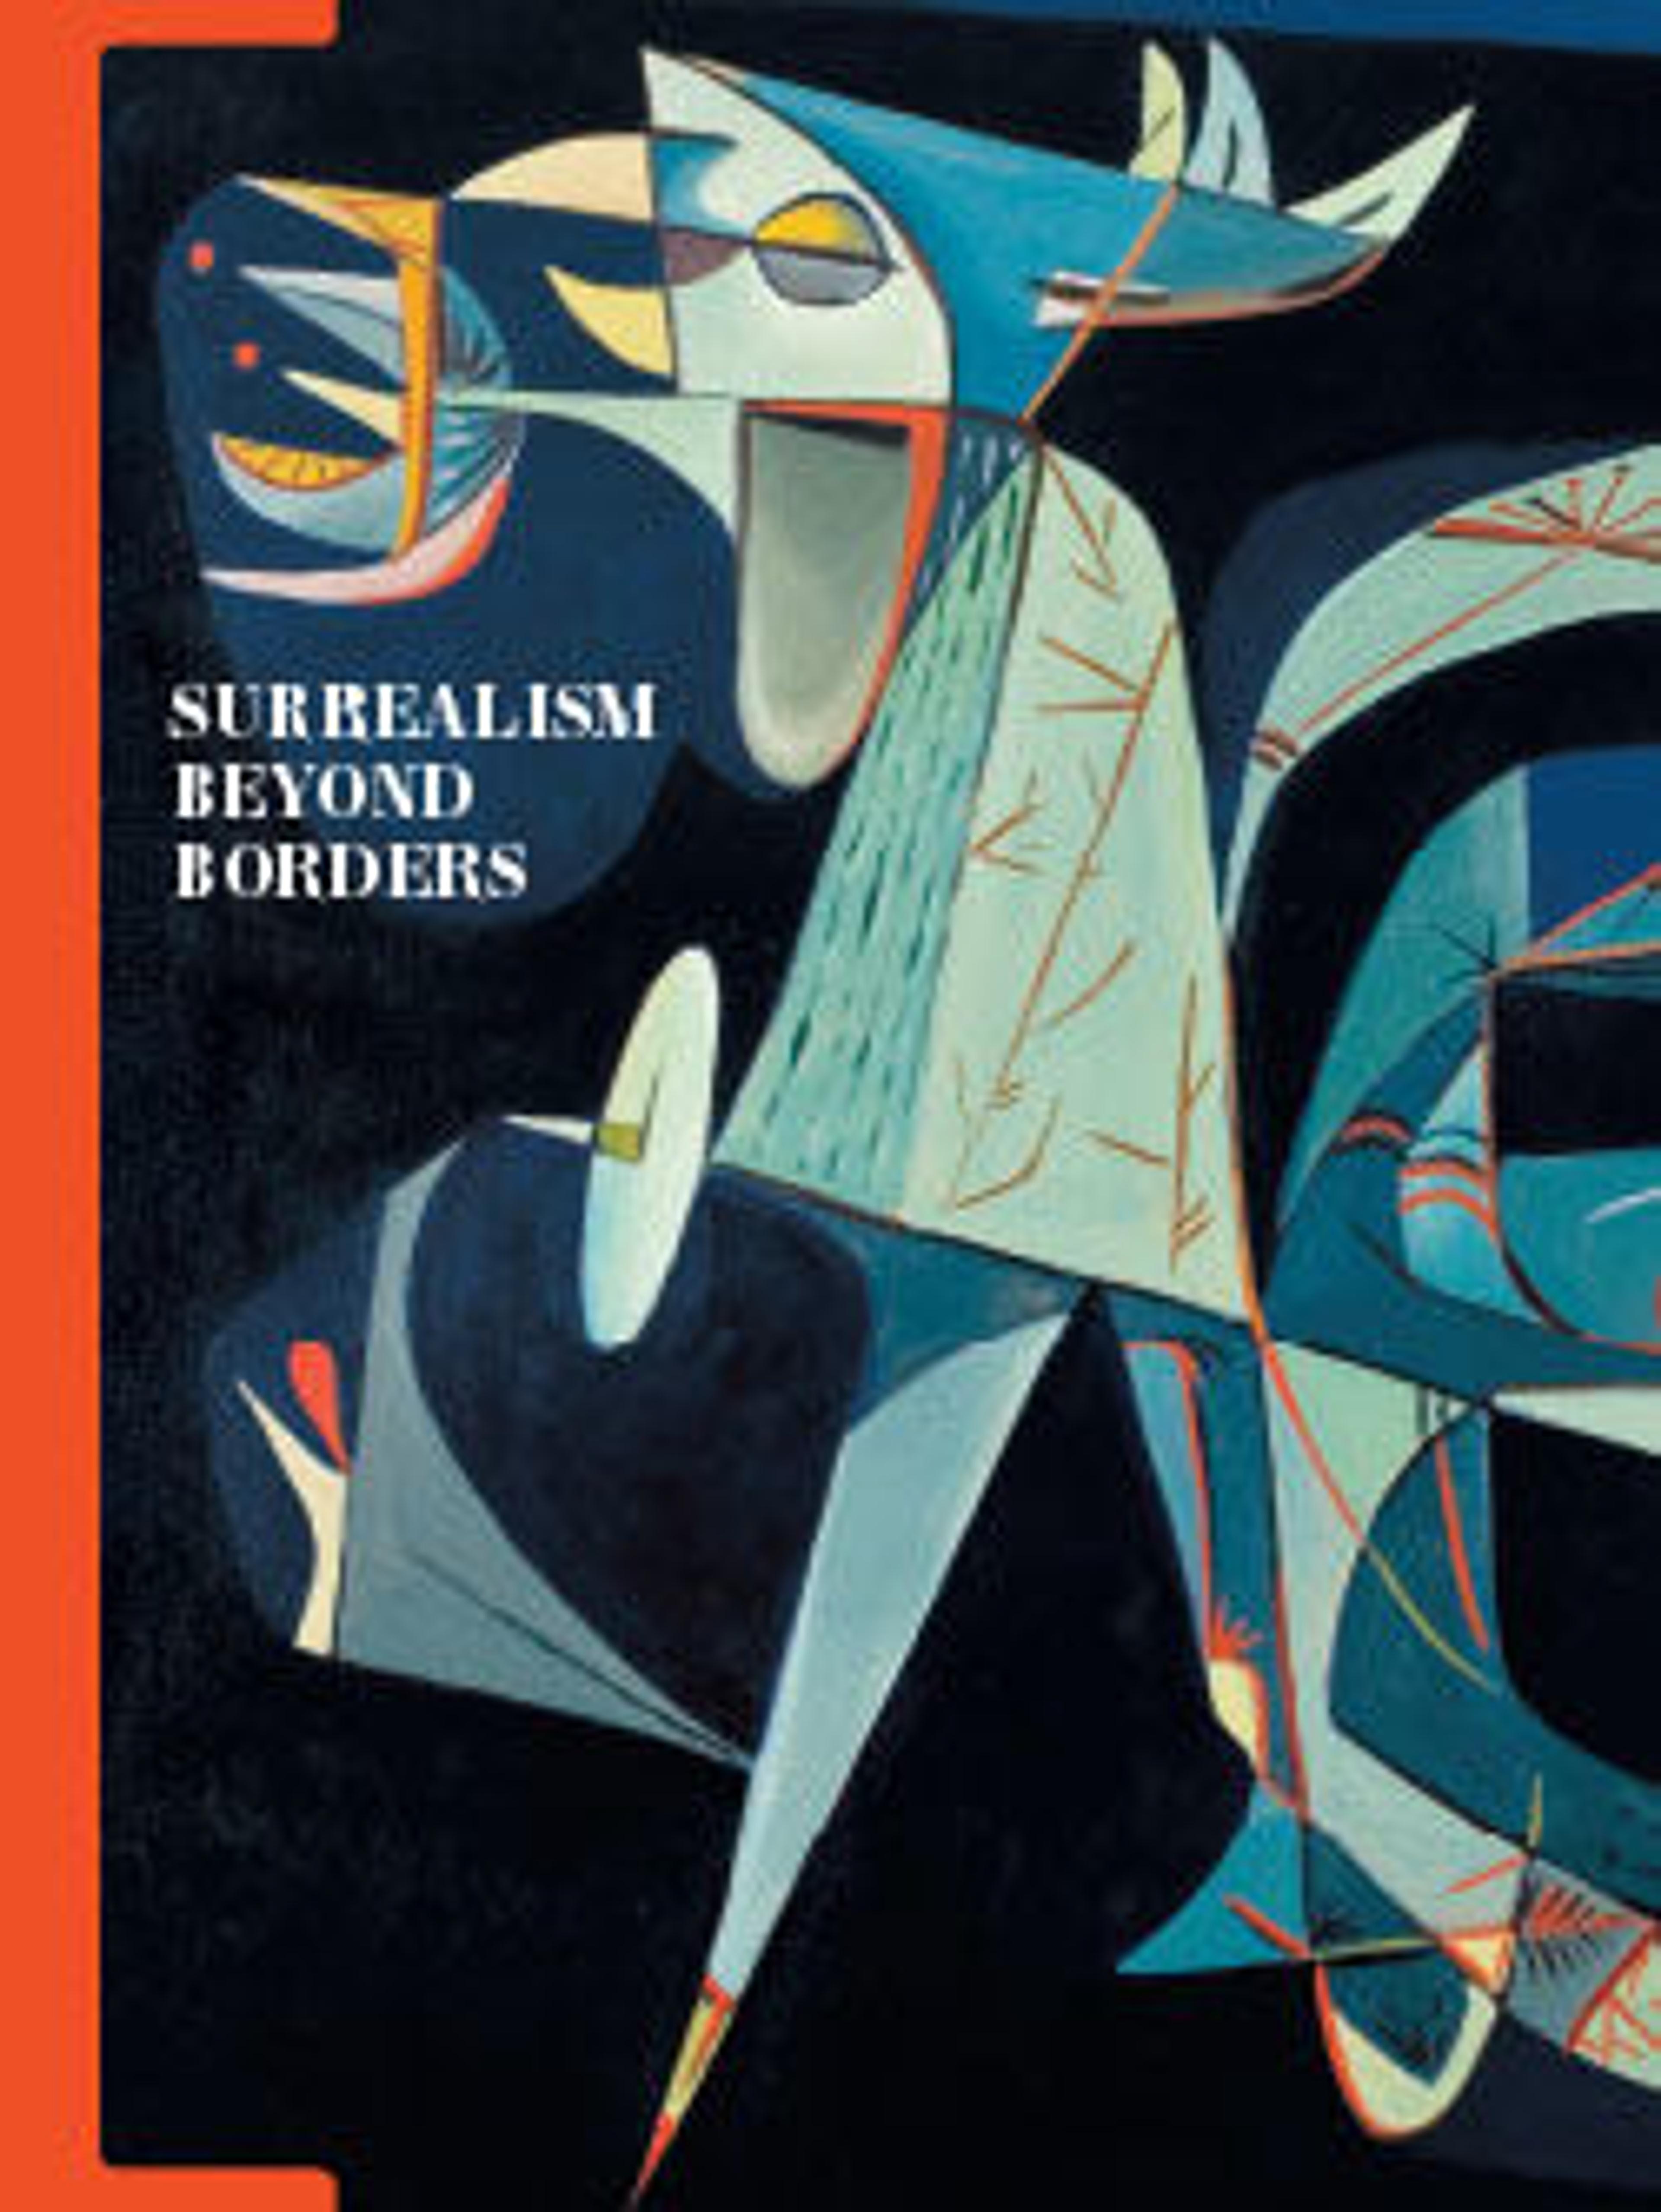 an abstract figure faces to the left with several shapes in the background, and the title of the book "Surrealism Beyond Borders" is on the left side next to a red border